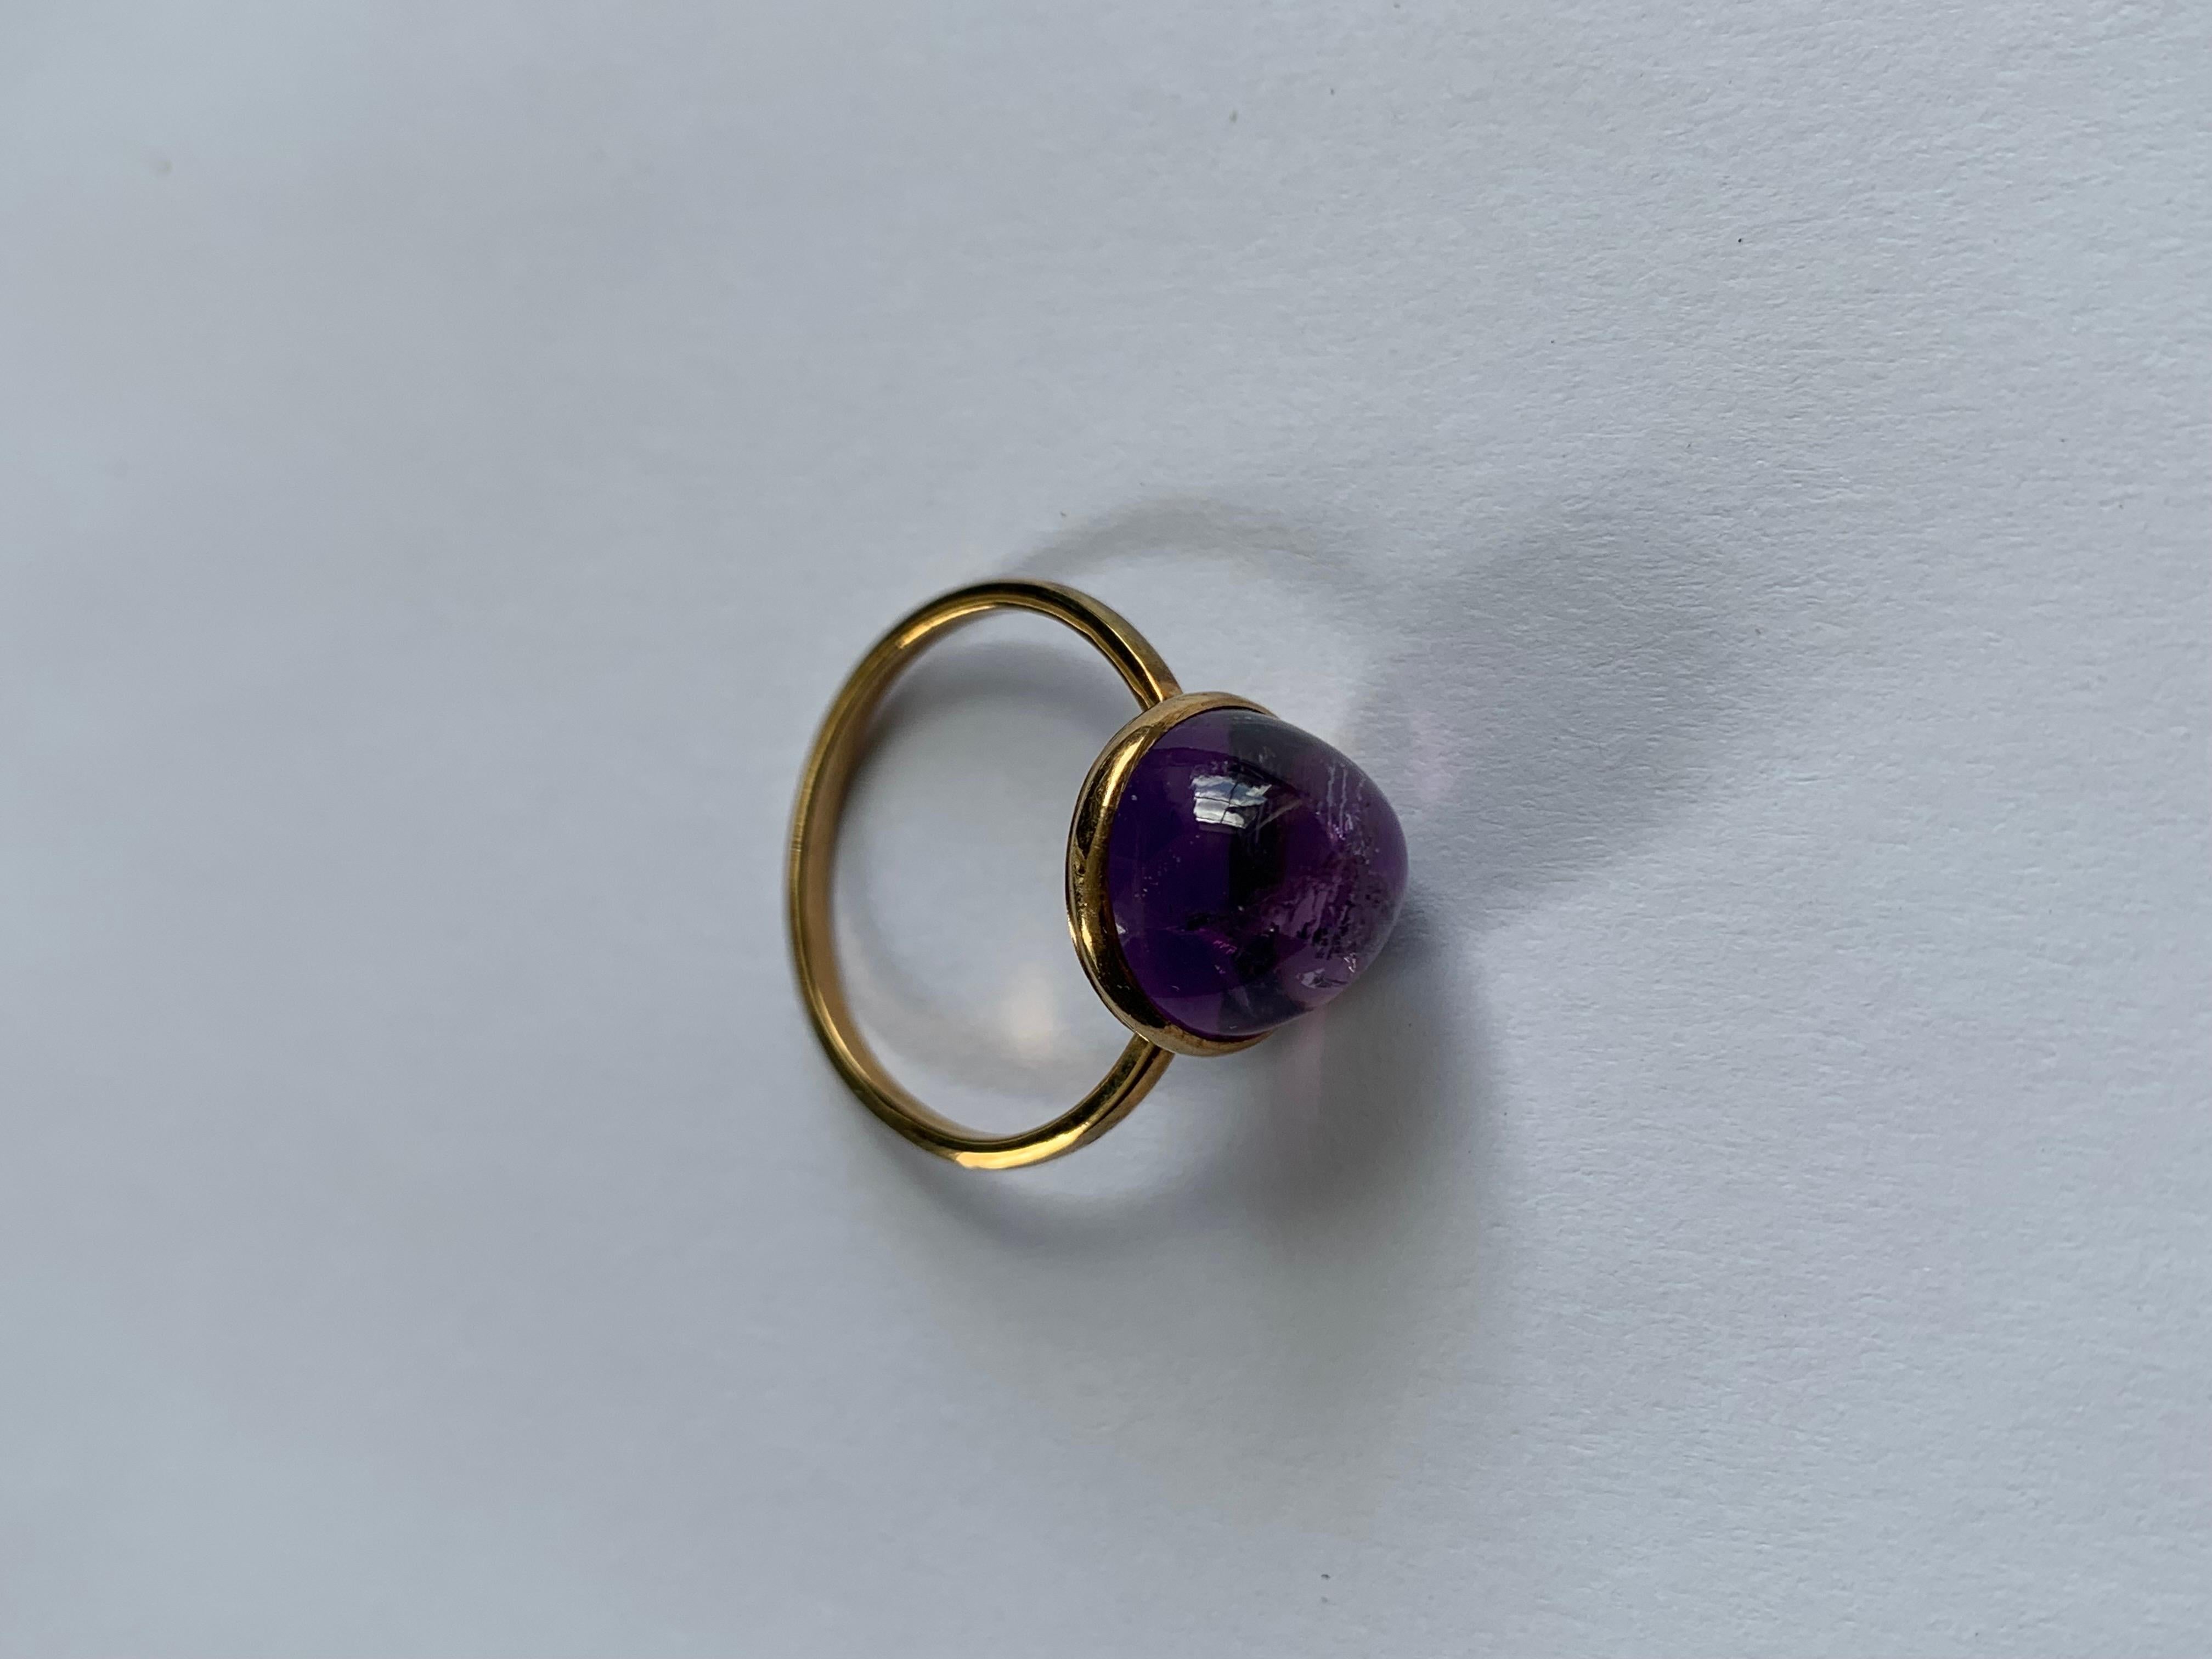 Wonderfully shaped cabochon amethyst cocktail ring. 
-Weight: 2.73g
-Measurements: Size UK R, Face 12x12mm, Height off finger 8.7mm
-Materials: 9ct yellow gold
-Hallmarks: none present 
-Condition: Good Overall - please refer to the photos provided